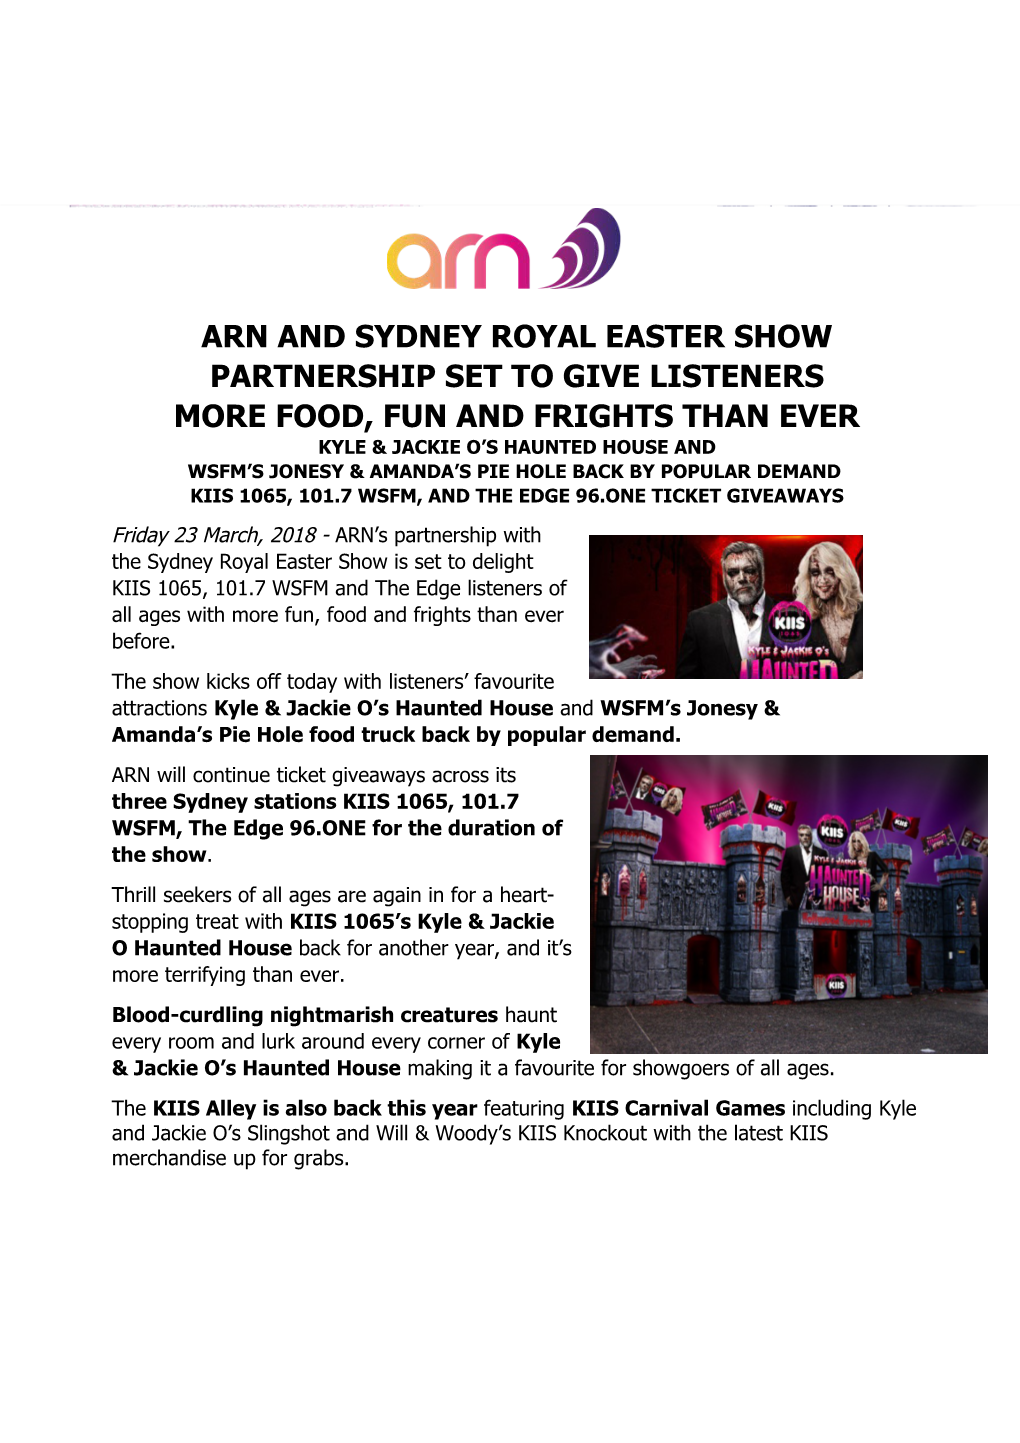 Arn and Sydney Royal Easter Show Partnership Set to Give Listeners More Food, Fun And